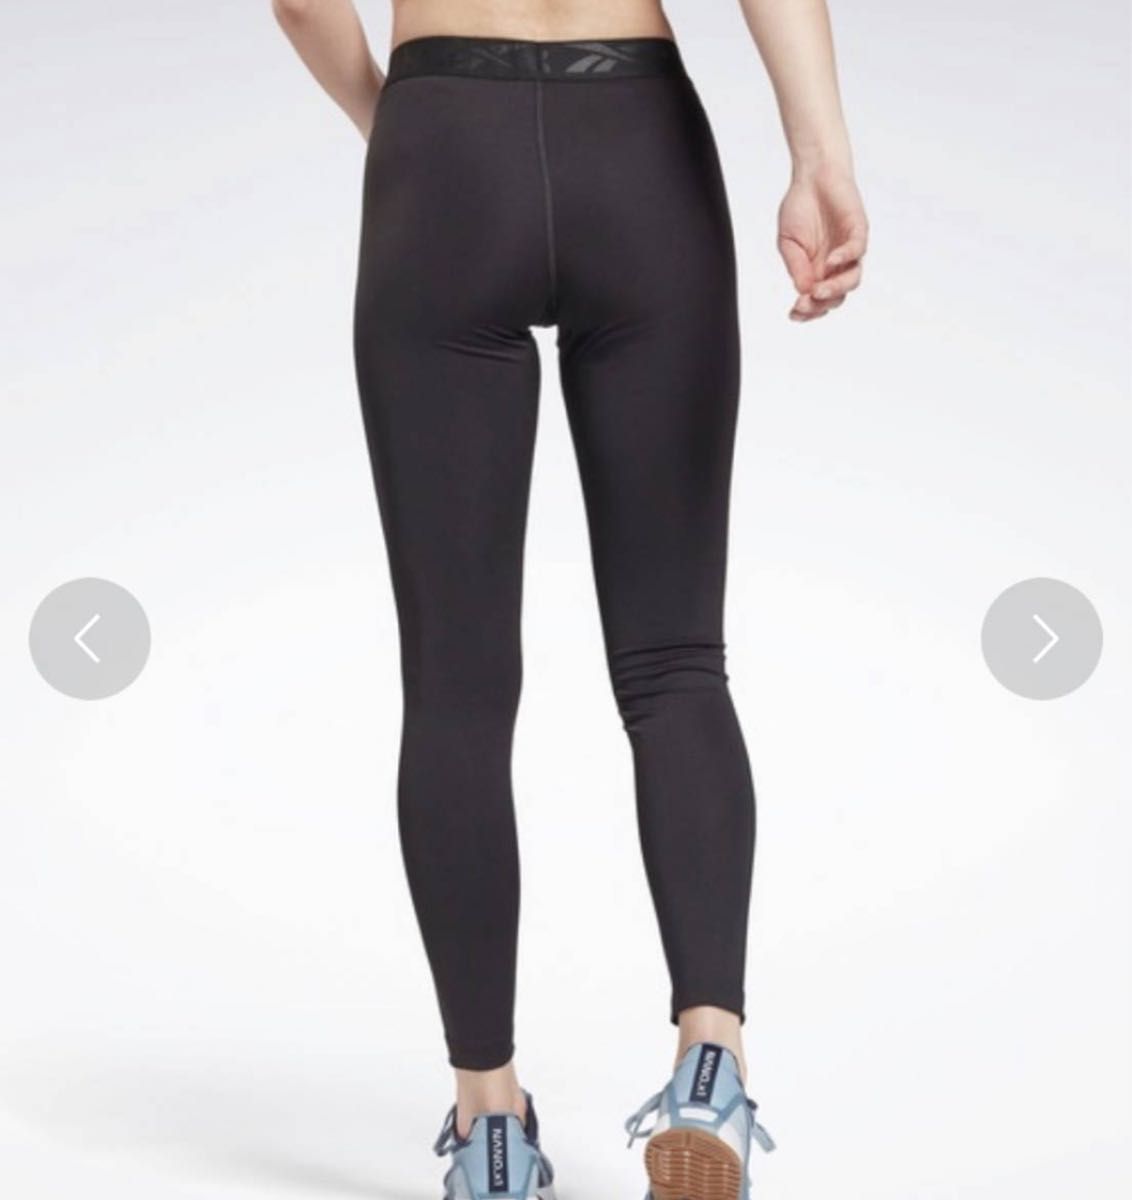 【Reebok】ワークアウト レディ コマーシャル タイツ [Workout Ready Commercial Tights...